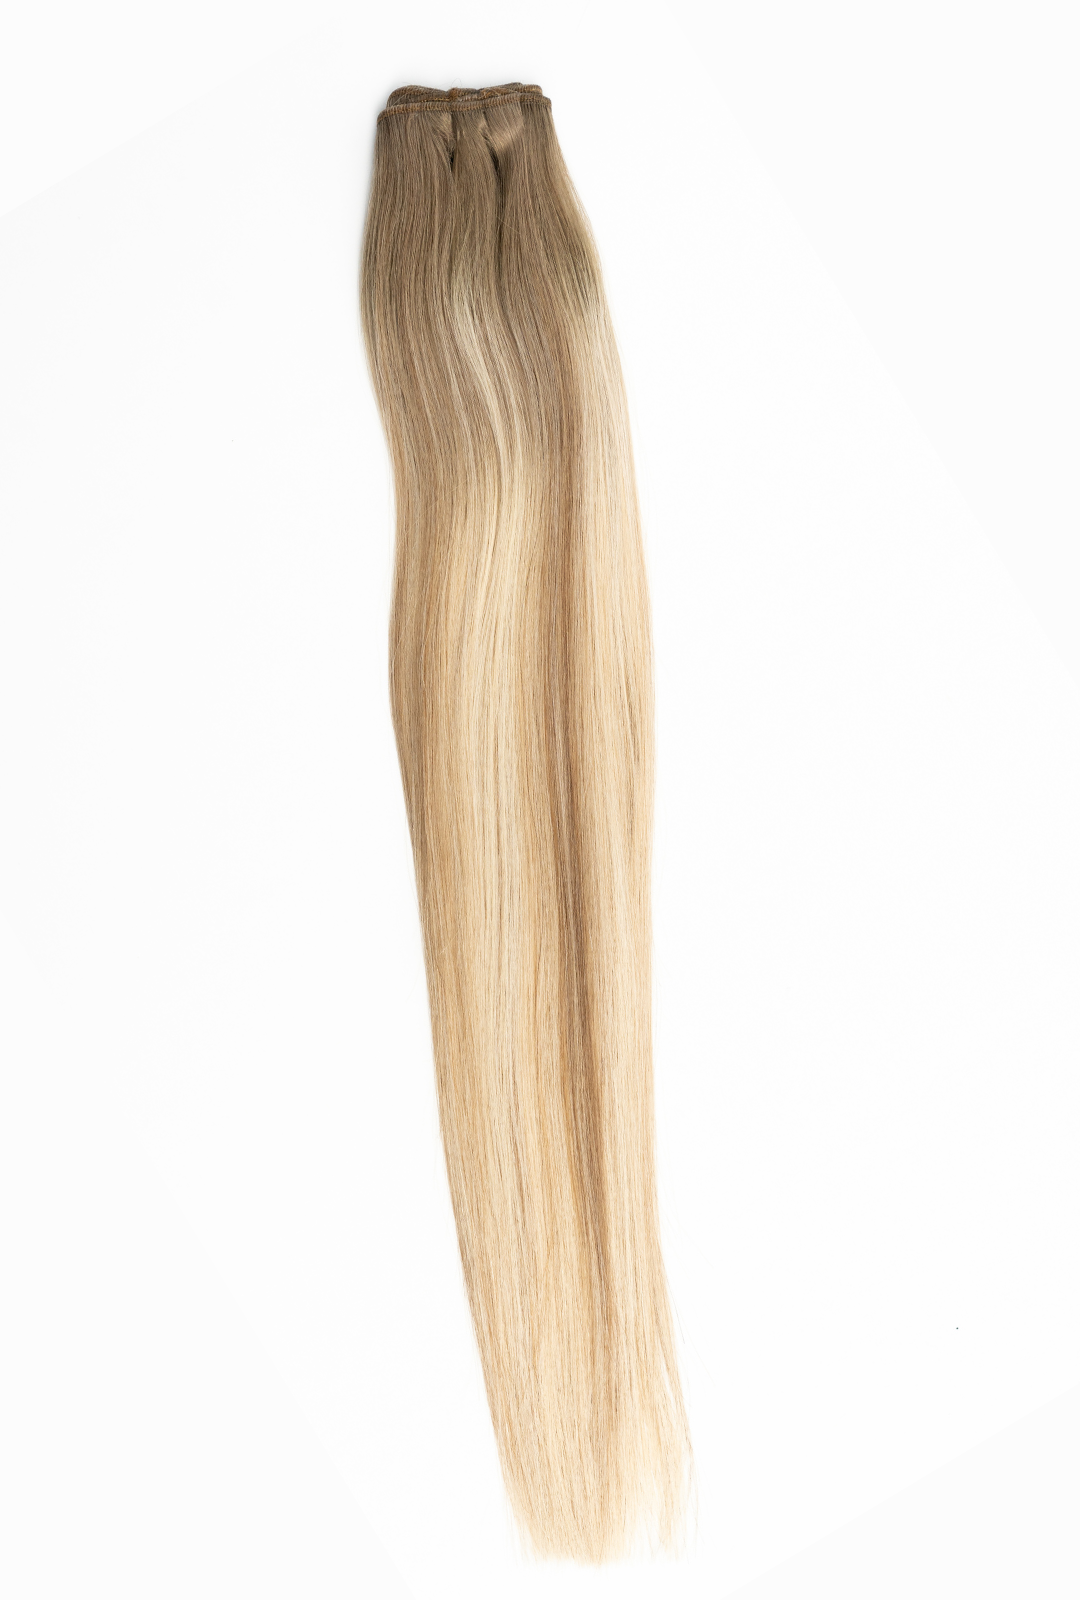 Beachwashed X Laced Hair Hand Tied Weft Extensions - Salt